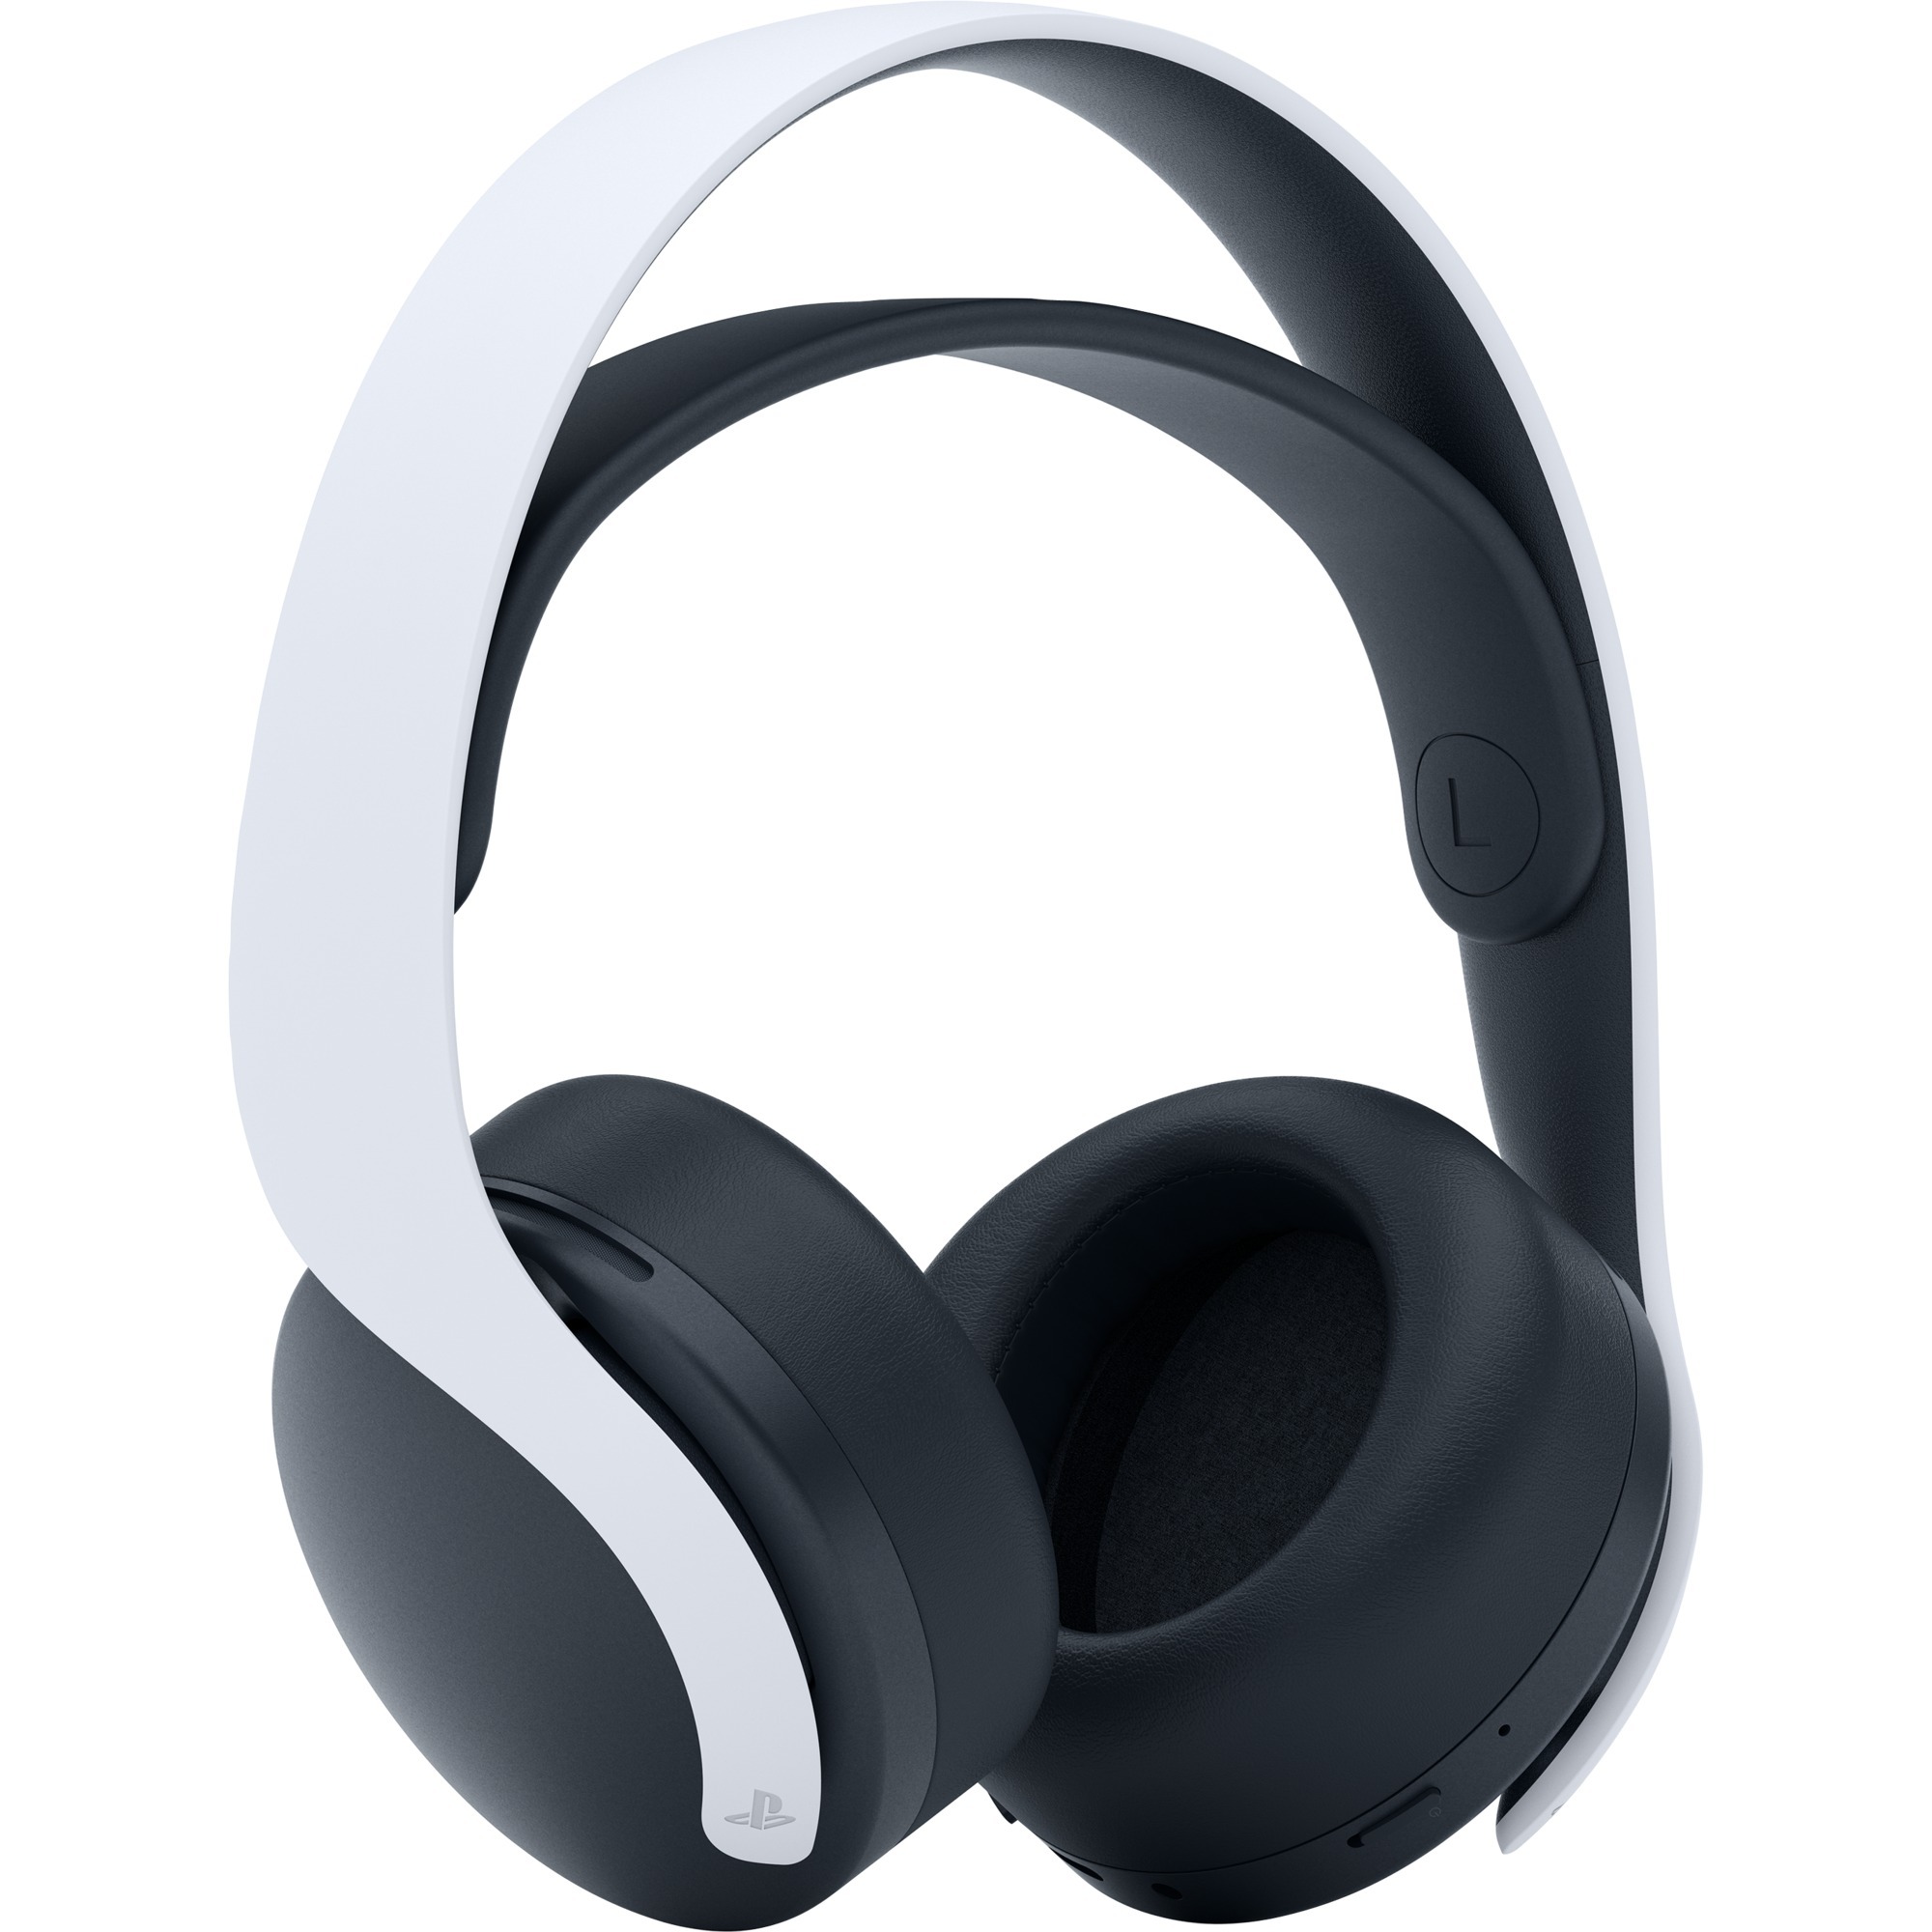 PULSE 3D-Wireless-Headset, Gaming-Headset